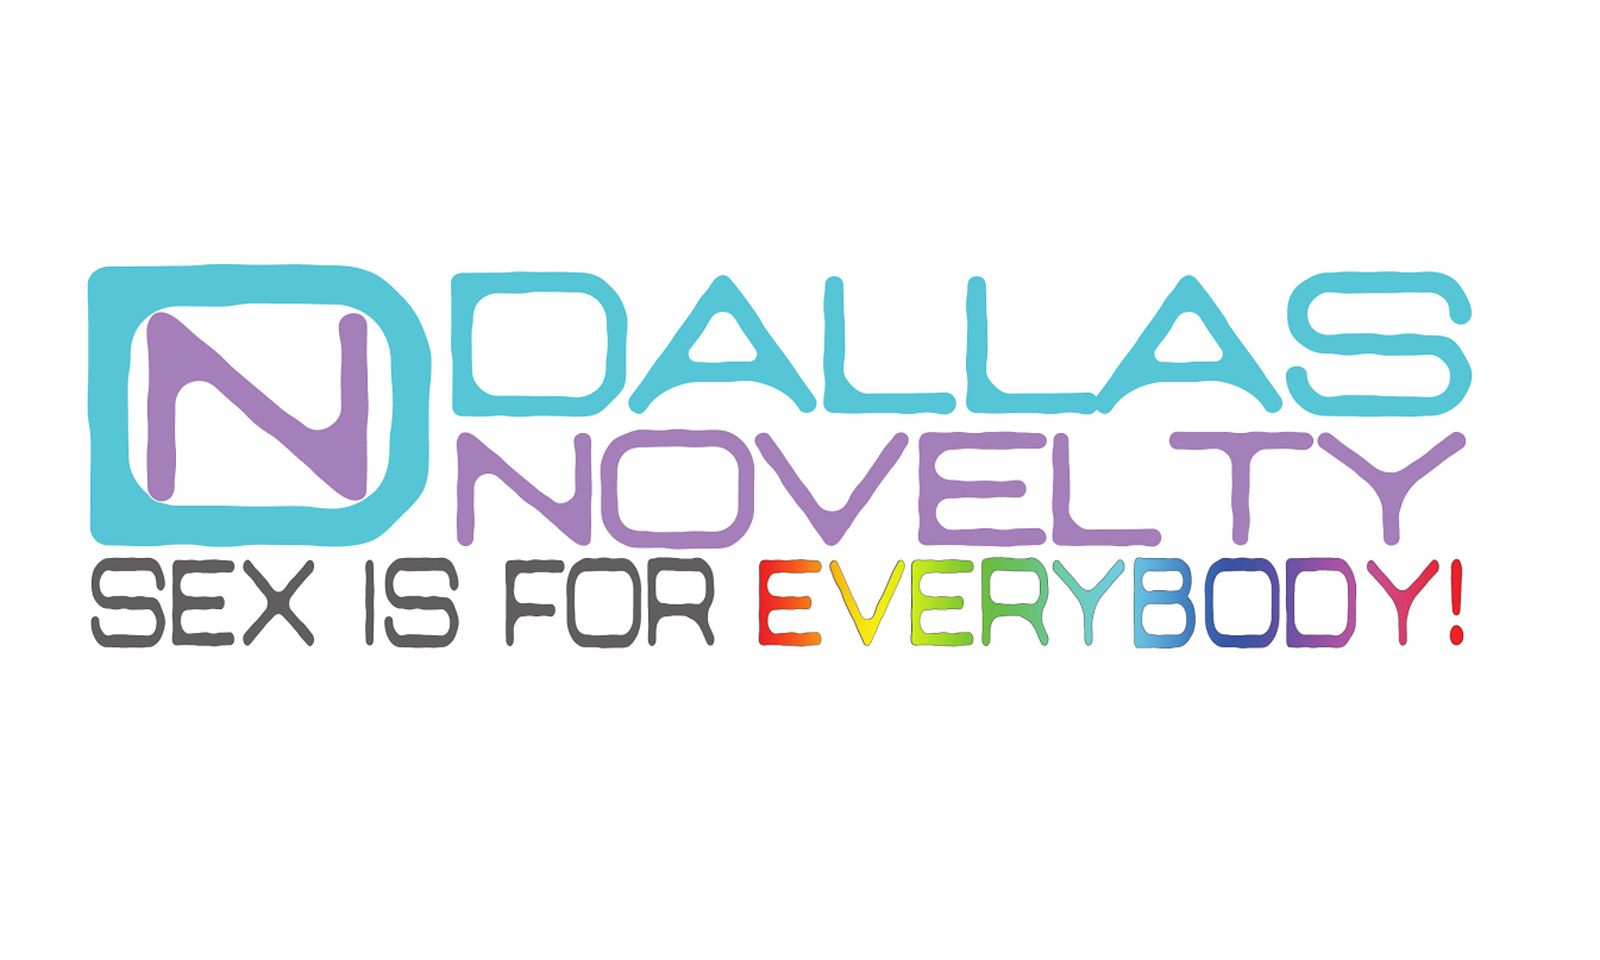 Dallas Novelty Offers New Digital Payment Options Starting This Week